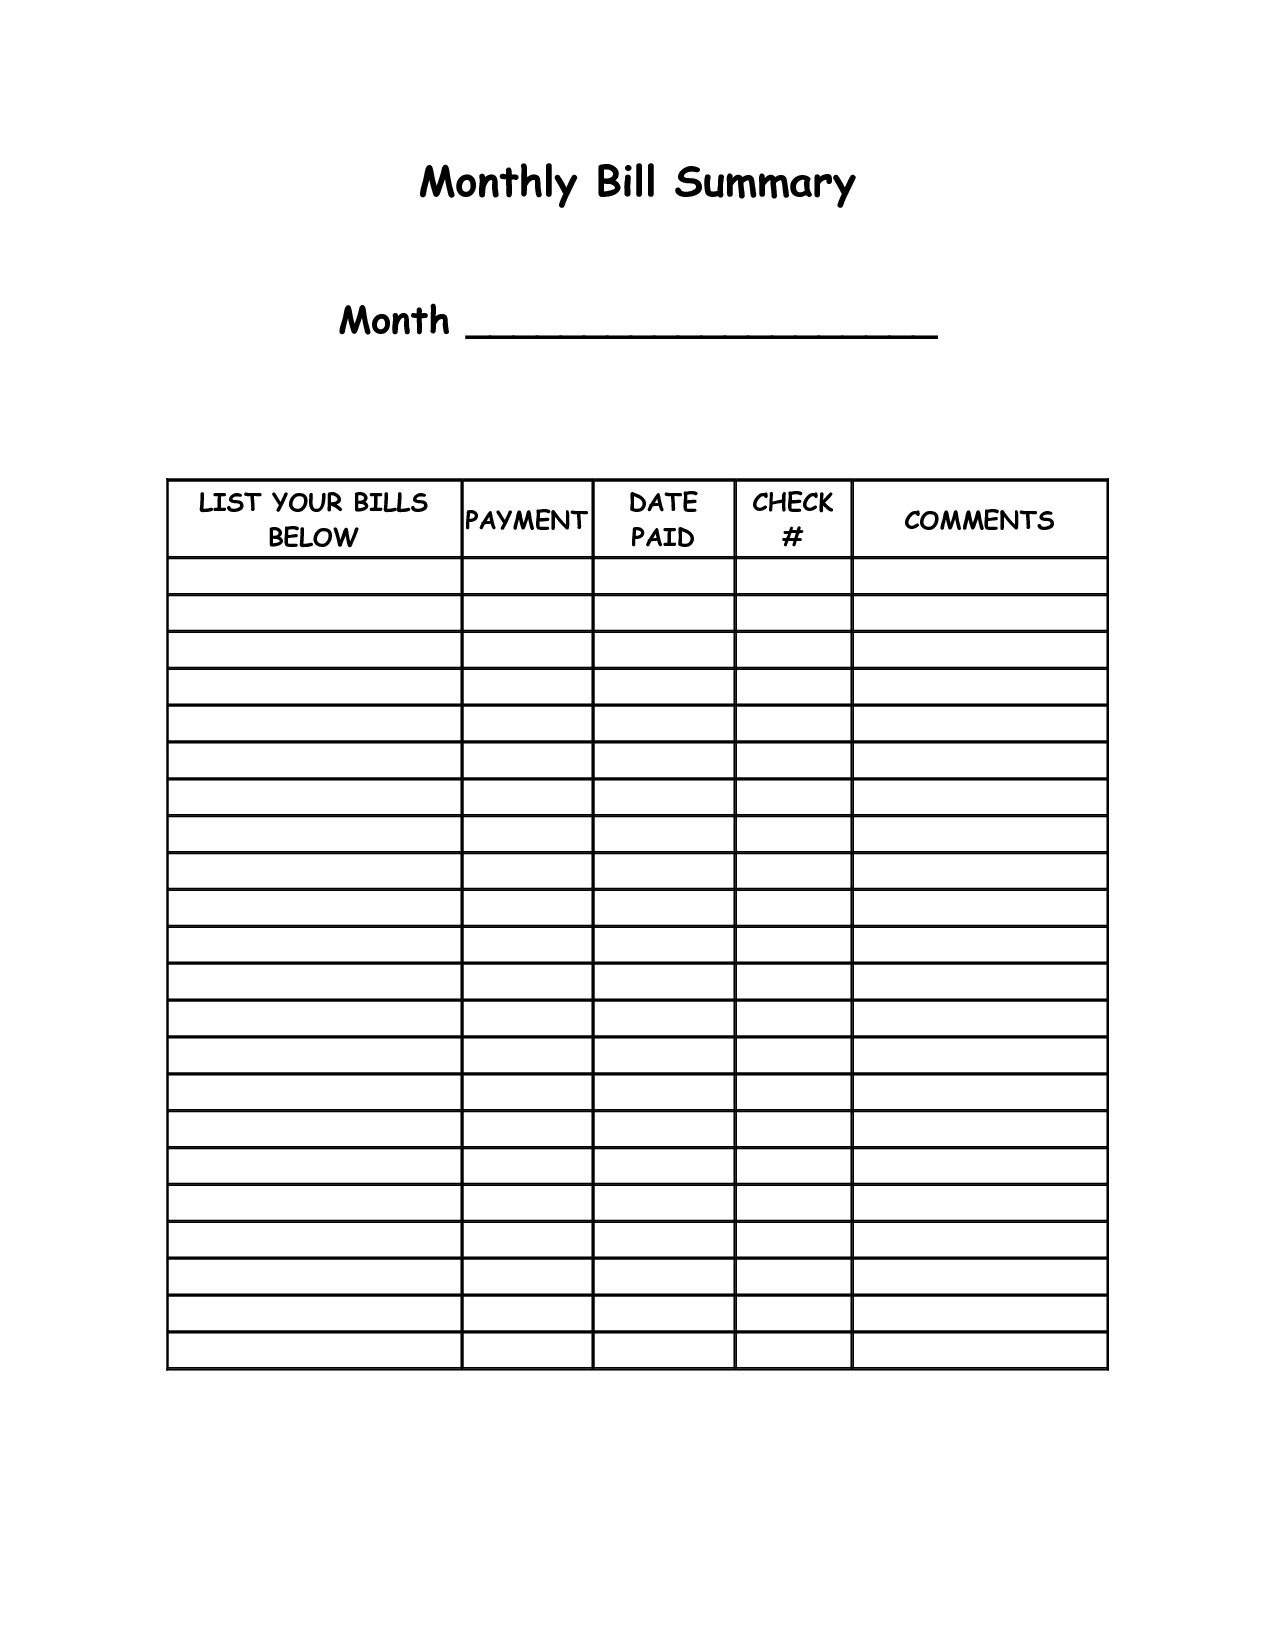 Monthly Bill Summary Doc | Organization | Organizing Monthly Bills within Free Printable Monthly Bill Payment Template